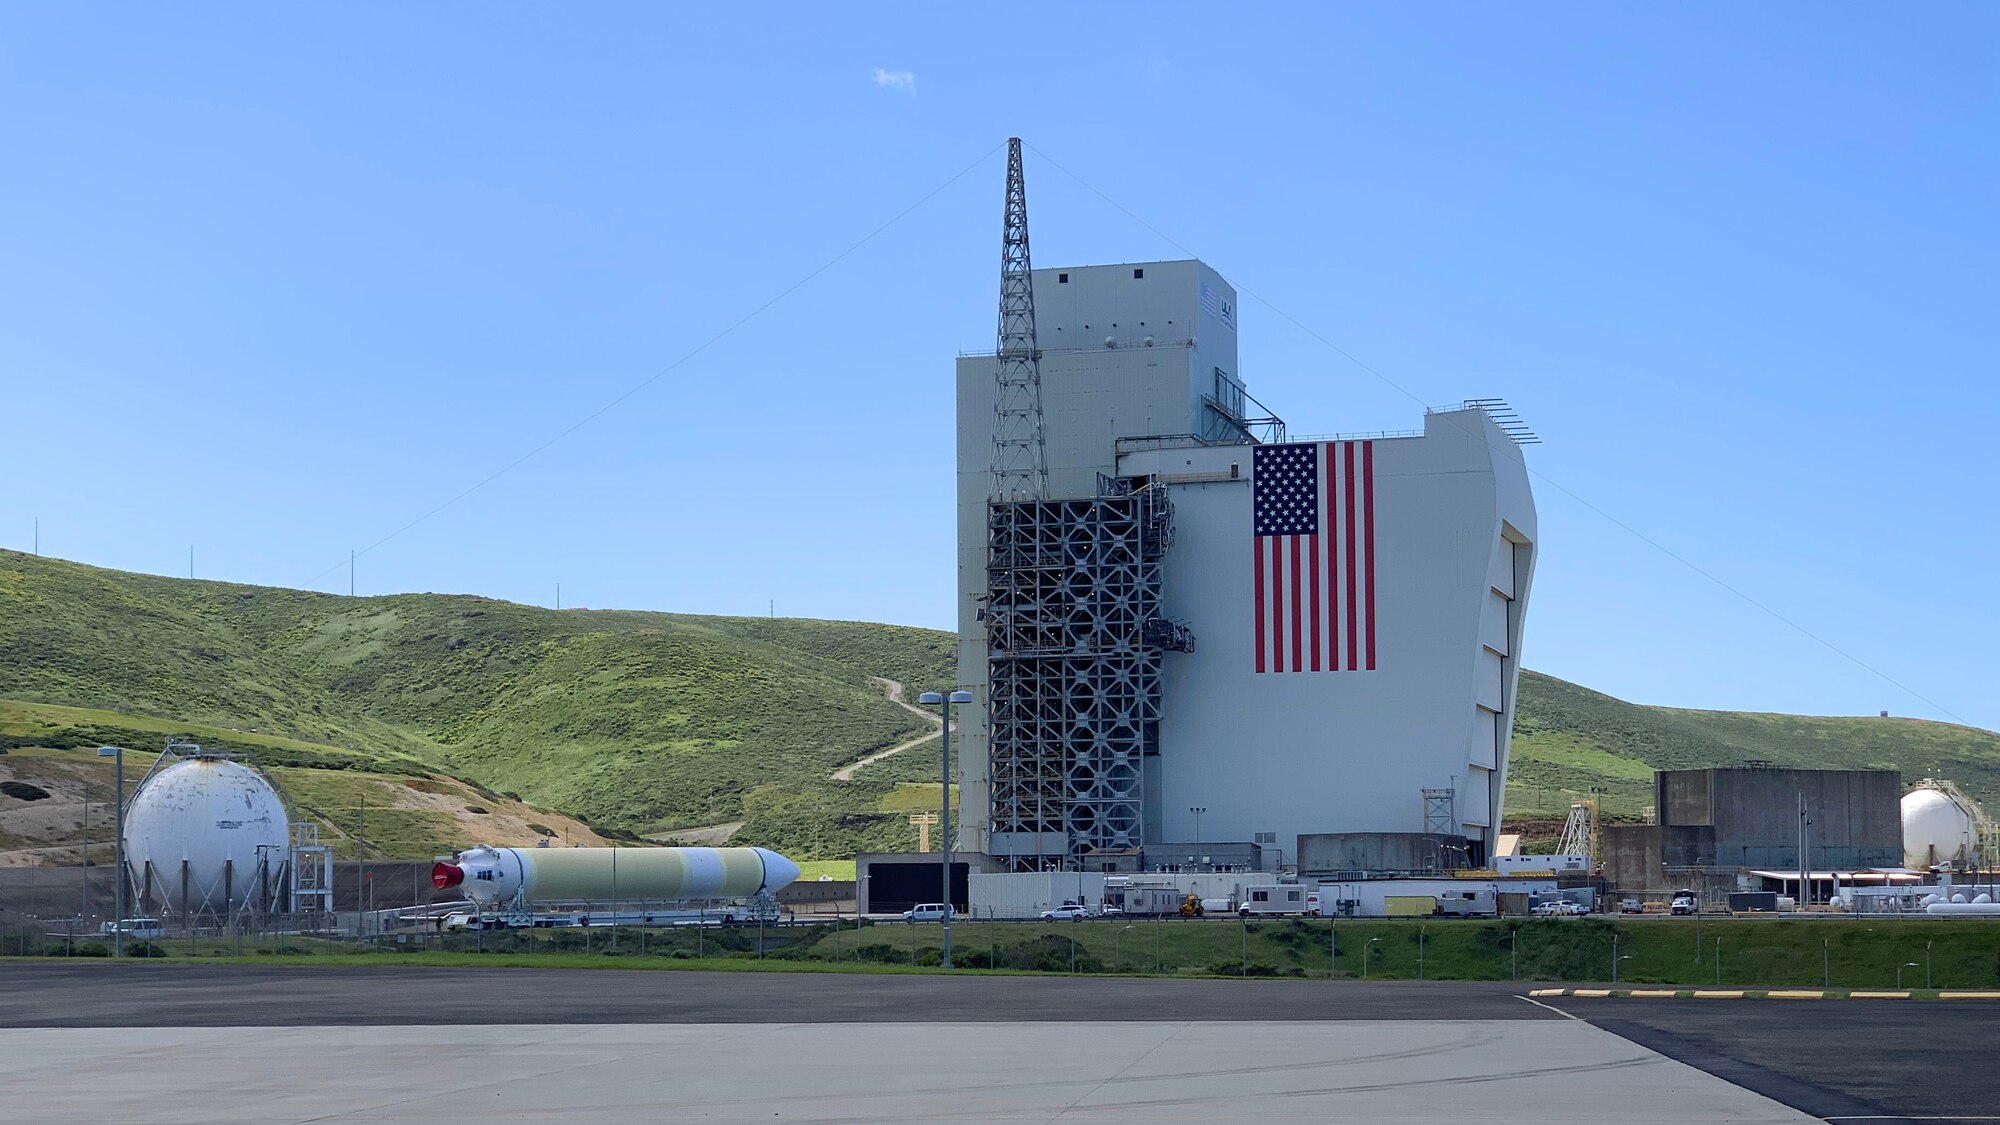 A Delta IV Heavy booster from a United Launch Alliance barge, known as the RocketShip, proceeds to the Horizontal Integration Facility May 4, 2020, at Vandenberg Air Force Base, Calif. A HIF is a building within which the stages of a multistage rocket are brought together before the assembled stack is rolled out to the launch pad or space launch complex and raised into a vertical position for final integration and launch. (Courtesy photo)